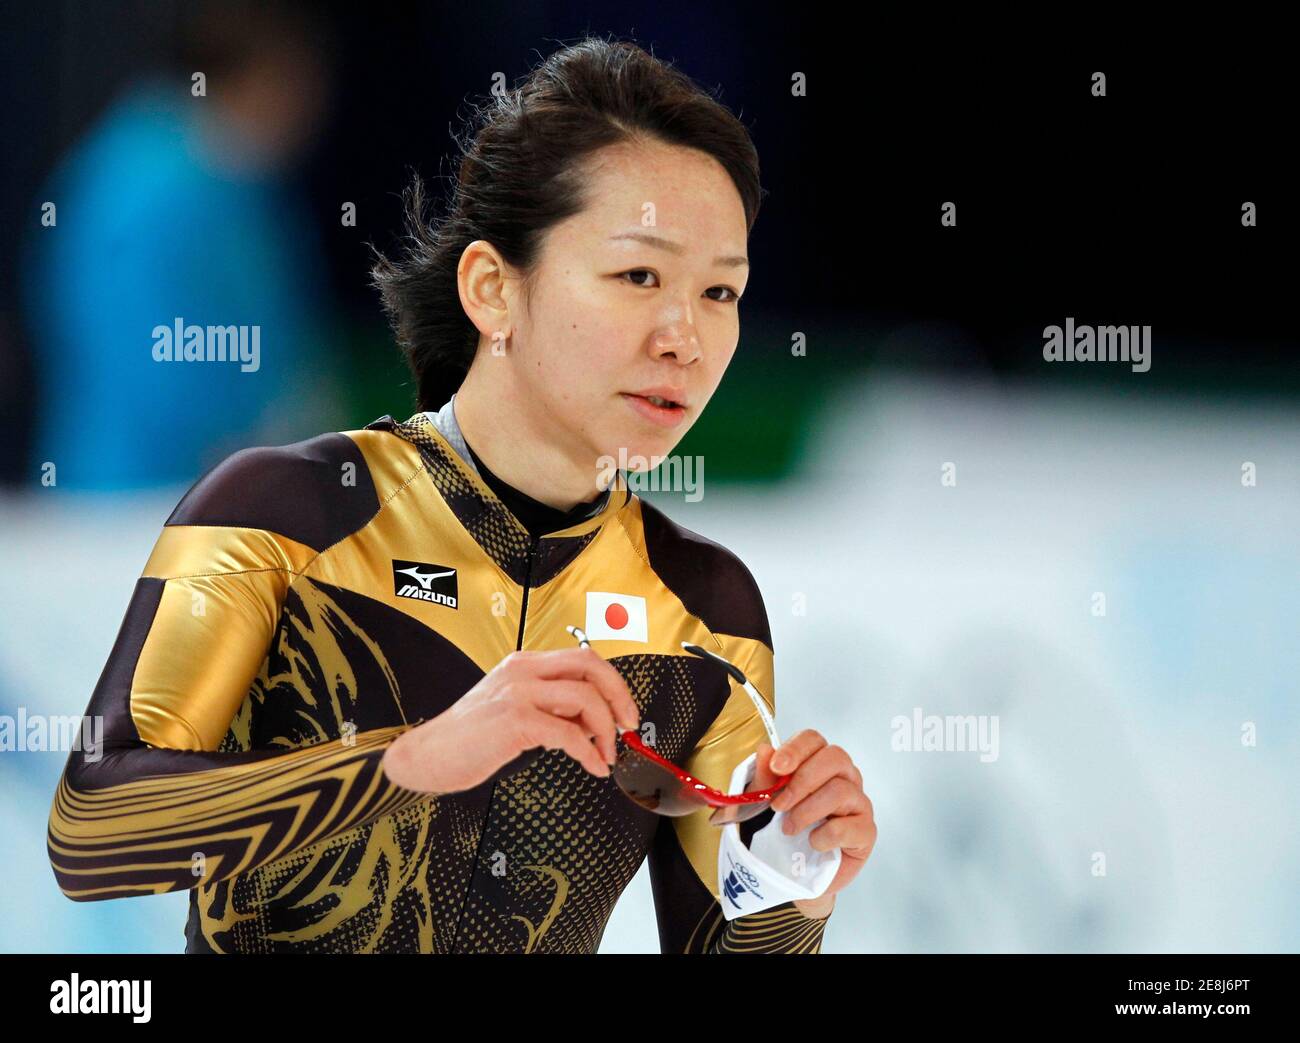 Speed skater Sayuri Yoshii of Japan takes off her protective glasses during training in preparation for the Vancouver 2010 Winter Olympics February 8, 2010.     REUTERS/Jerry Lampen (CANADA) Stock Photo